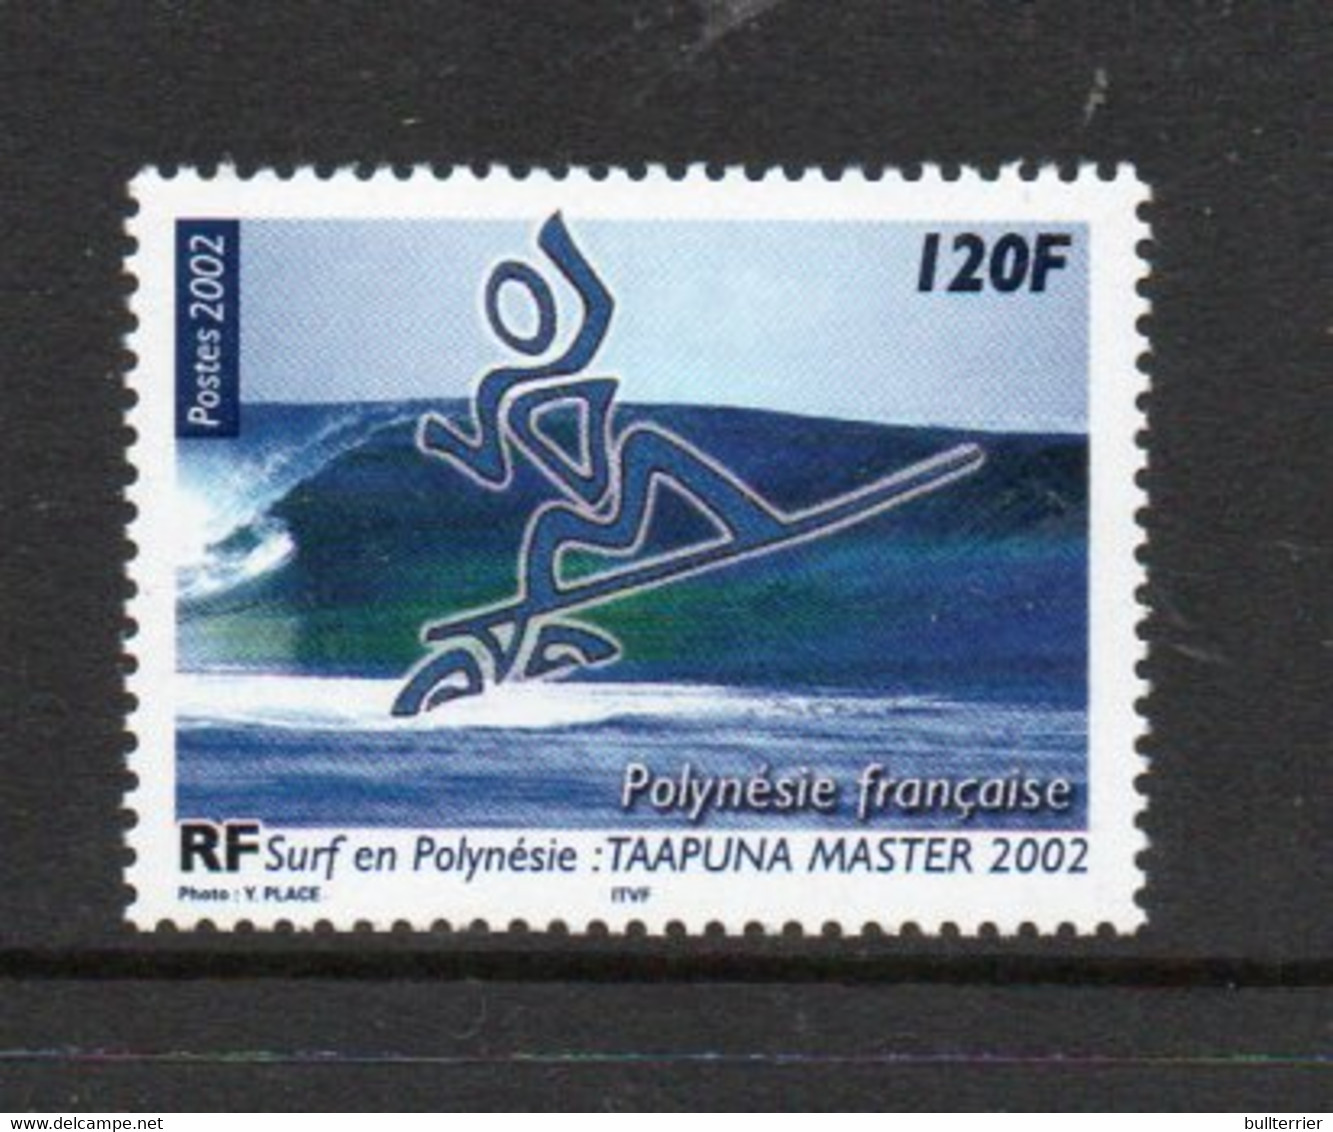 SURFING  - POLYNESIA - 2002 - SURFING  MINT NEVER HINGED - Waterski